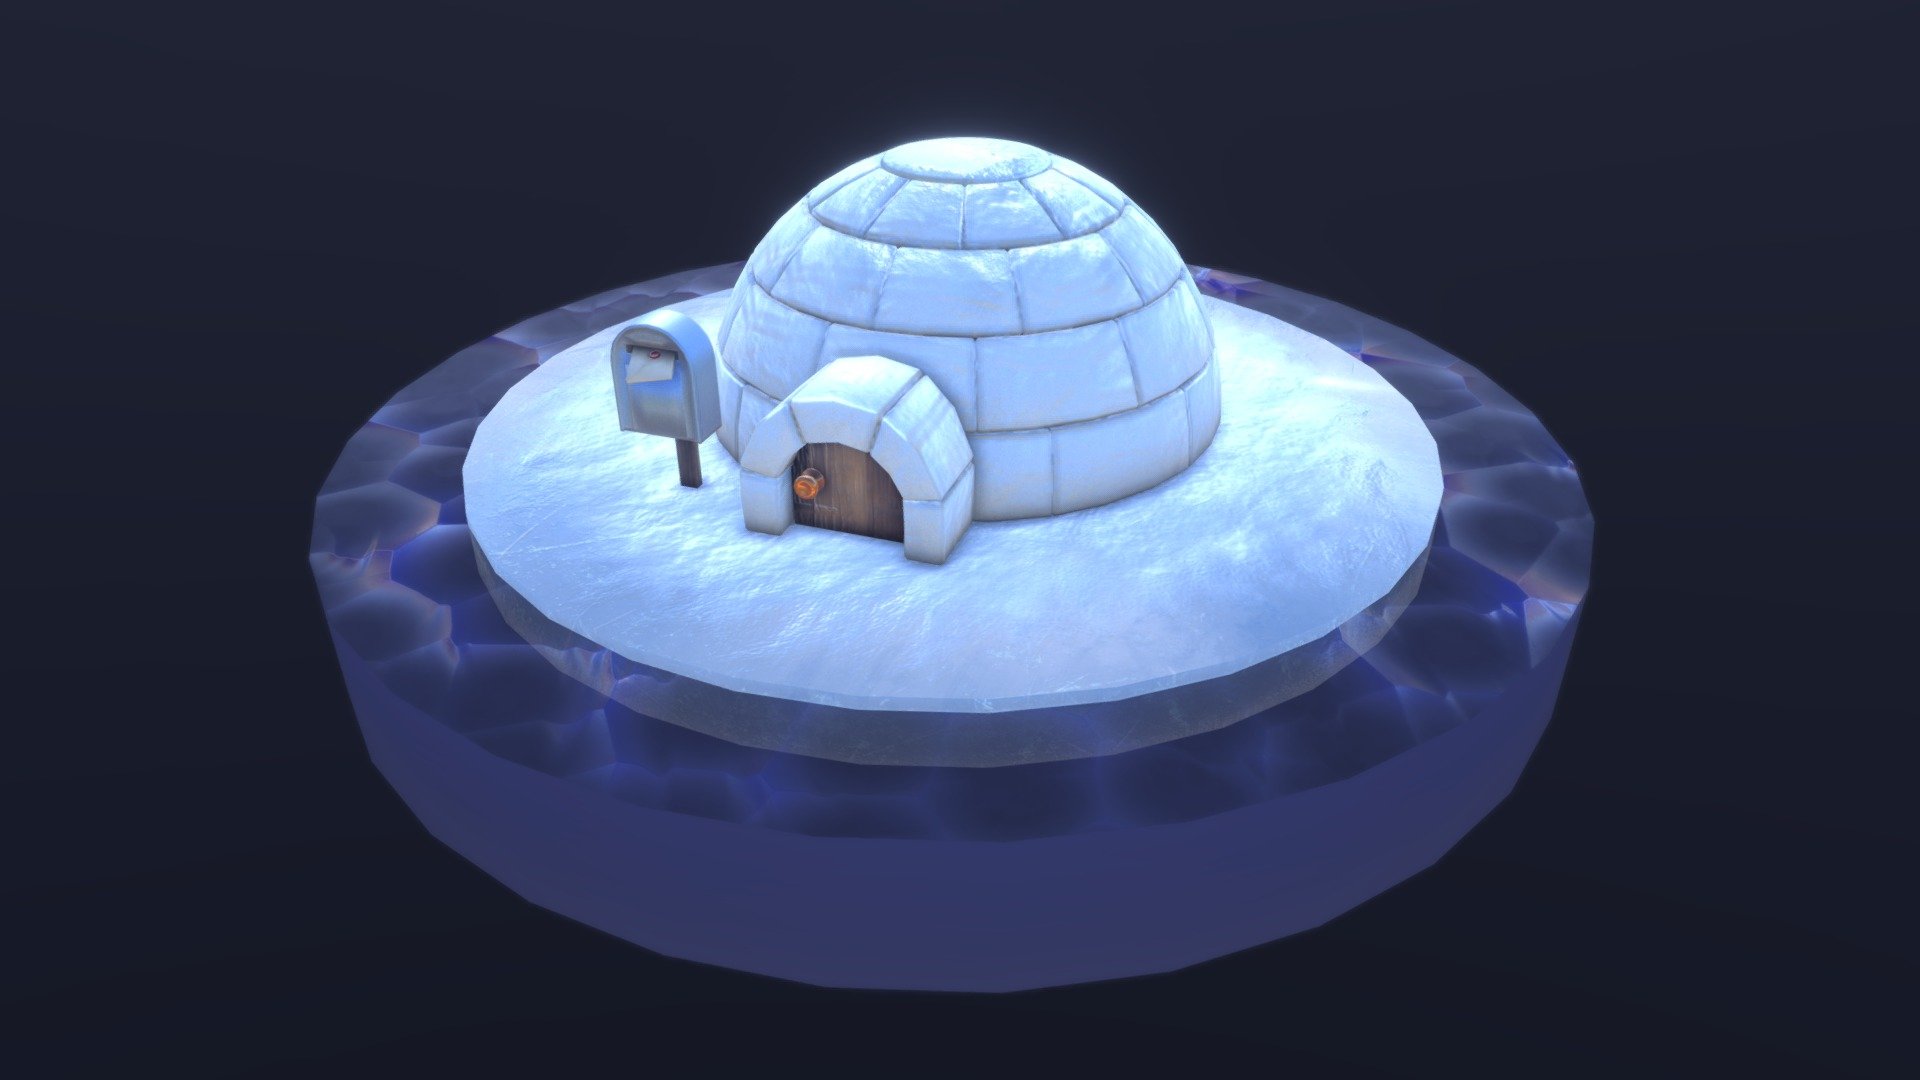 7 Igloo 3d Model By Almondfeather Almondfeather 6e1362c Sketchfab